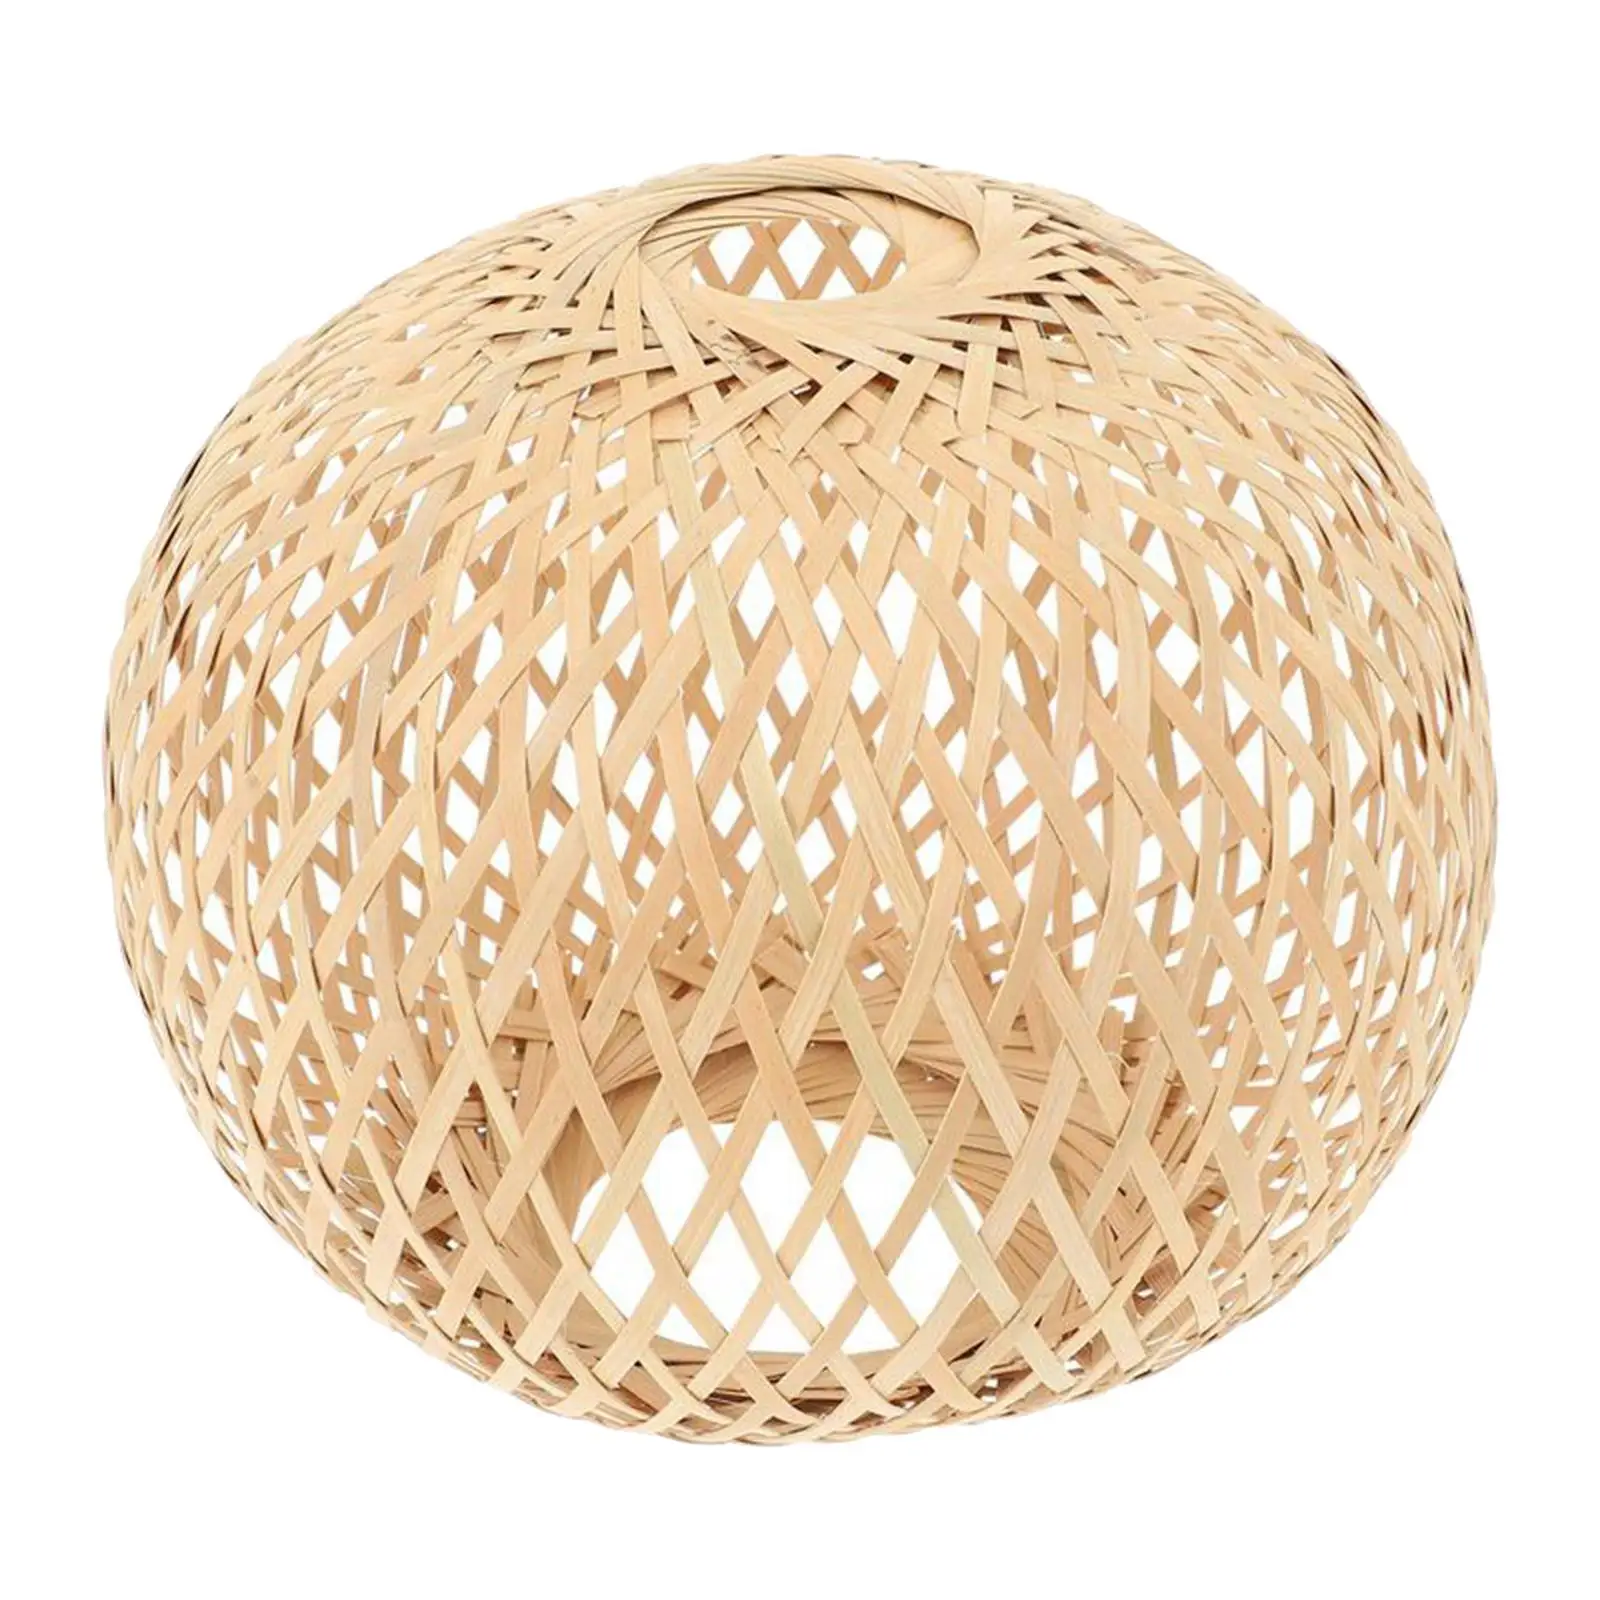 

Bamboo Woven Lampshade Handwoven Rustic for Kitchen Island Teahouse 21x20cm